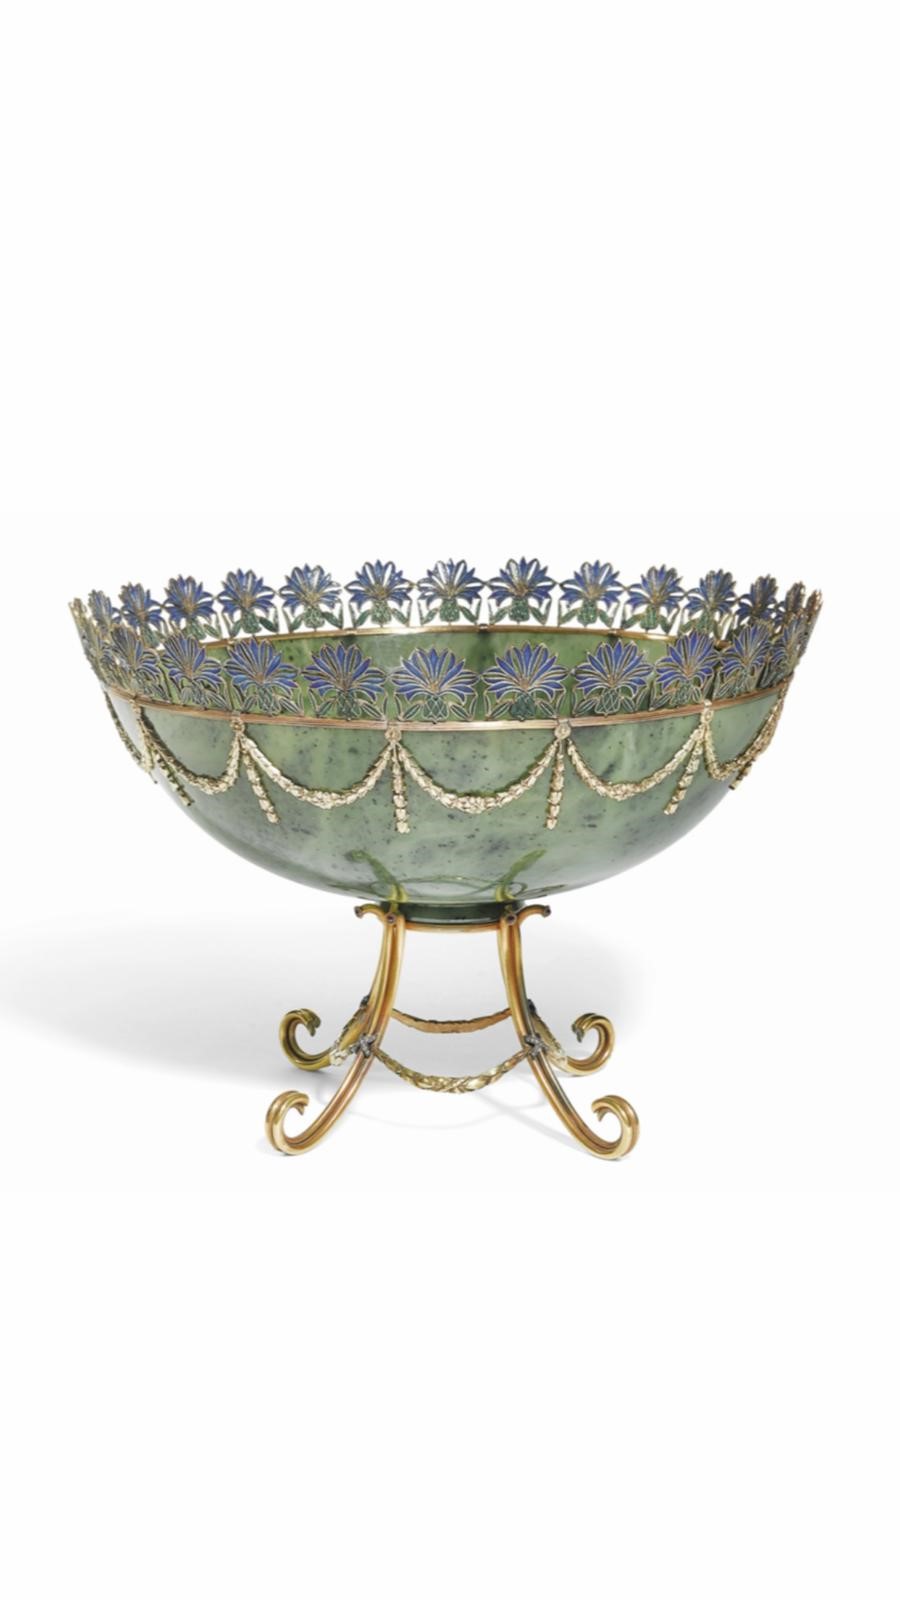 A 14CT GOLD, NEPHRITE, ENAMEL AND DIAMOND MOUNTED BOWL IN THE STYLE OF FABERGE BY S. RUDLE